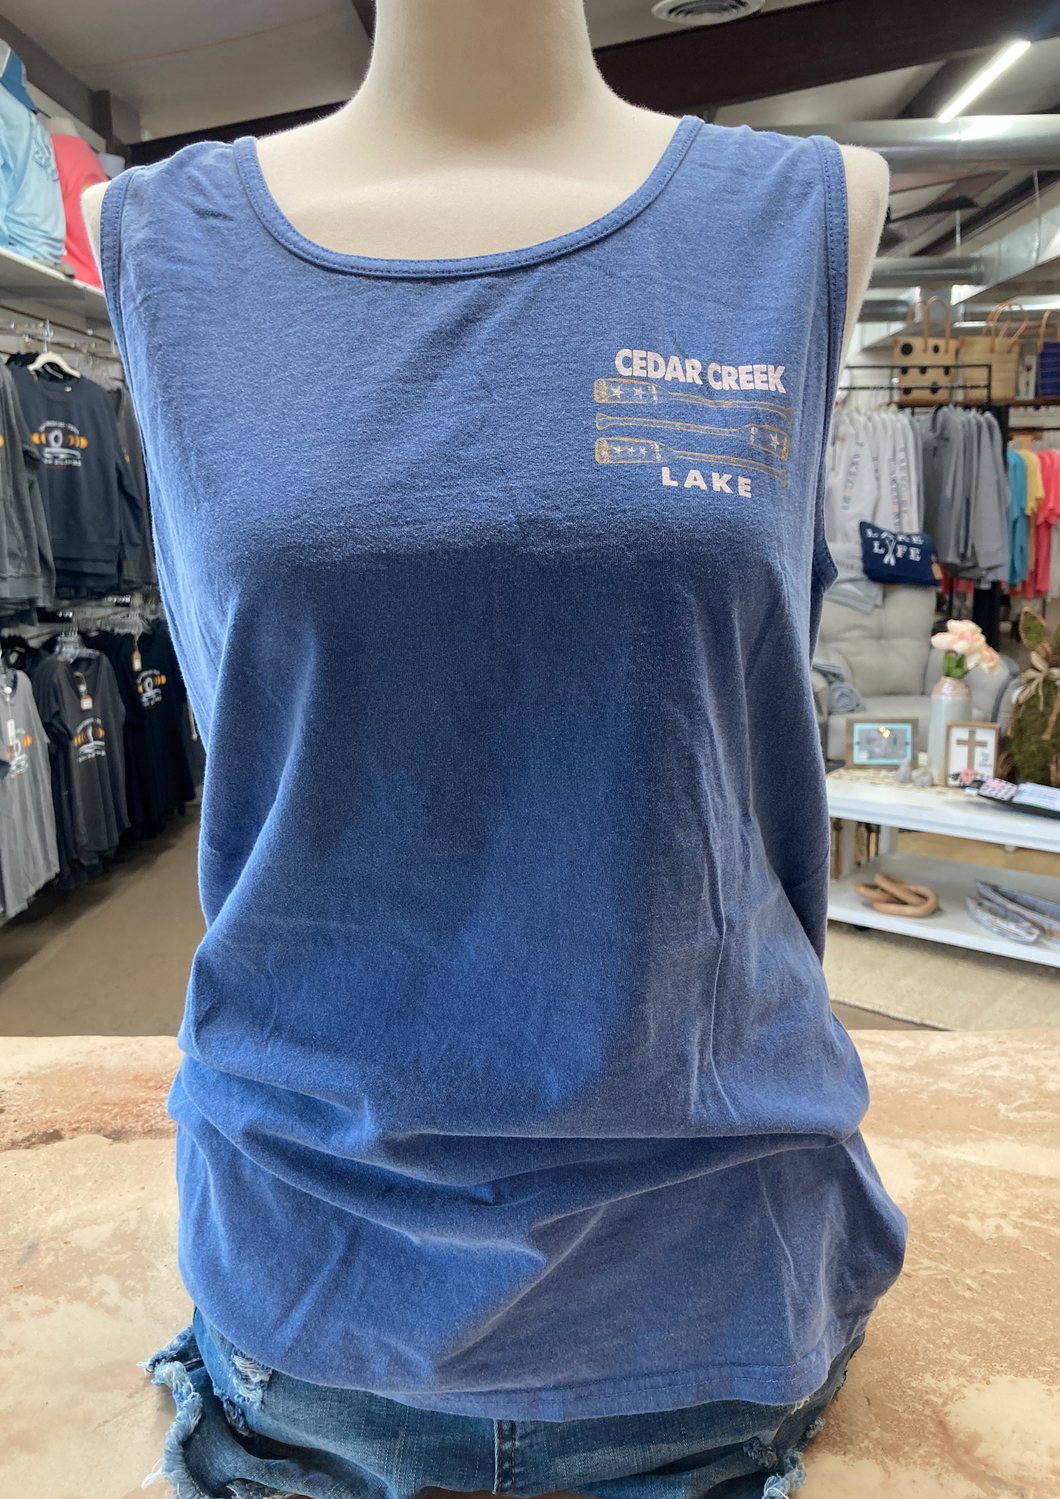 Casual pacific blue ringspun cotton tank top with 'Cedar Creek Lake' printed on the front, displayed on a mannequin in a boutique setting.